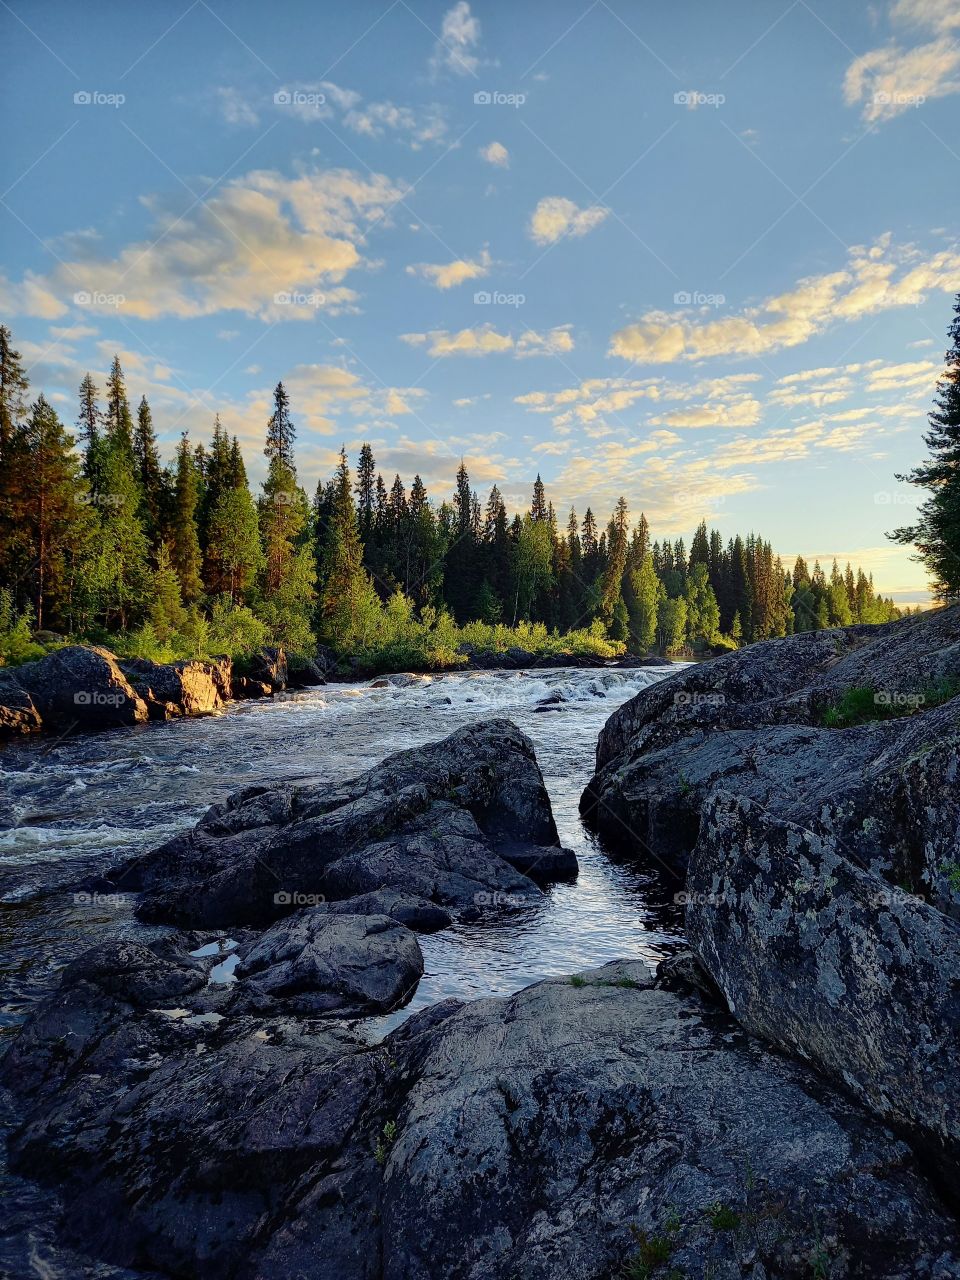 Woodland landscape with river in Karelia, Karelian region, Russia. Spruce forest🌲